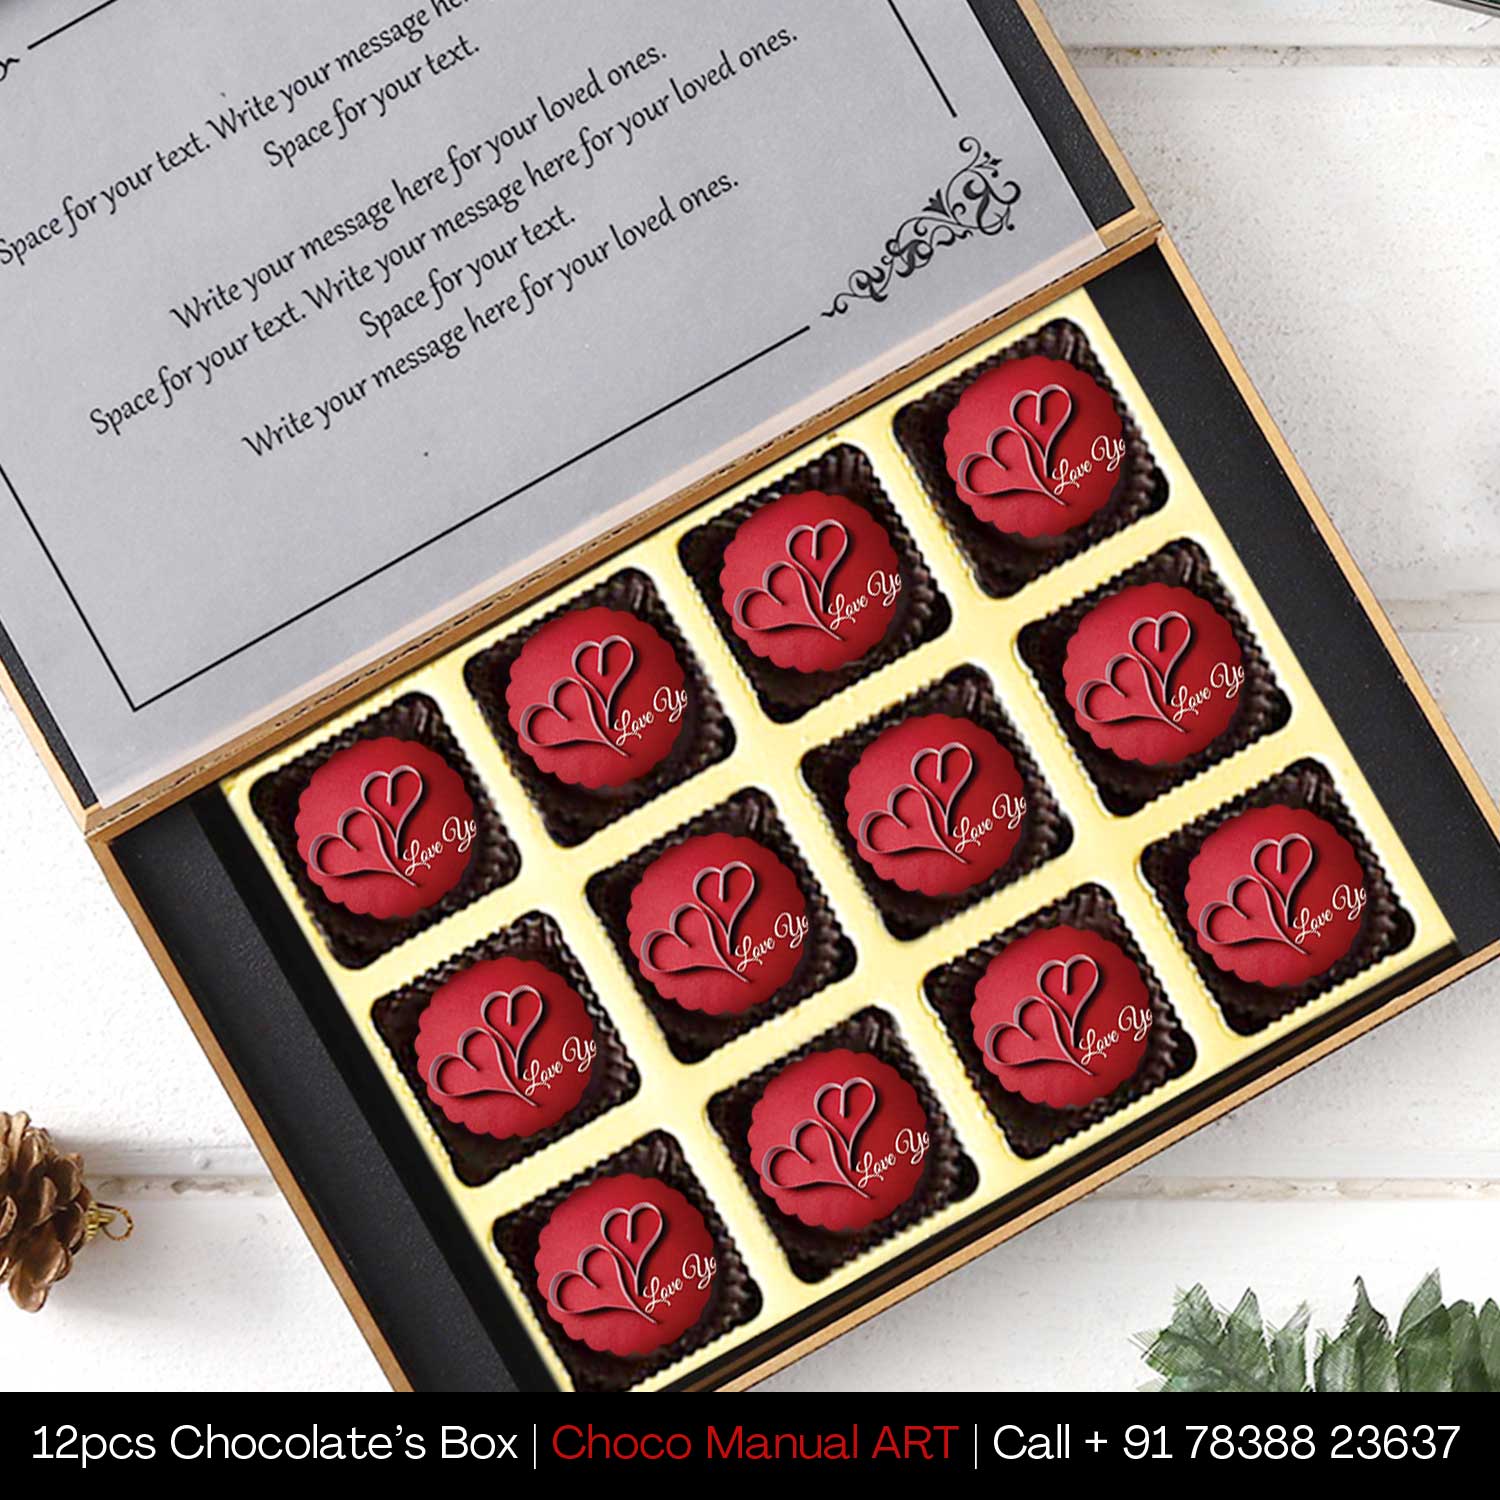 BUY Love You Printed Chocolate Gift Boxes with Personalisation - Choco ManualART